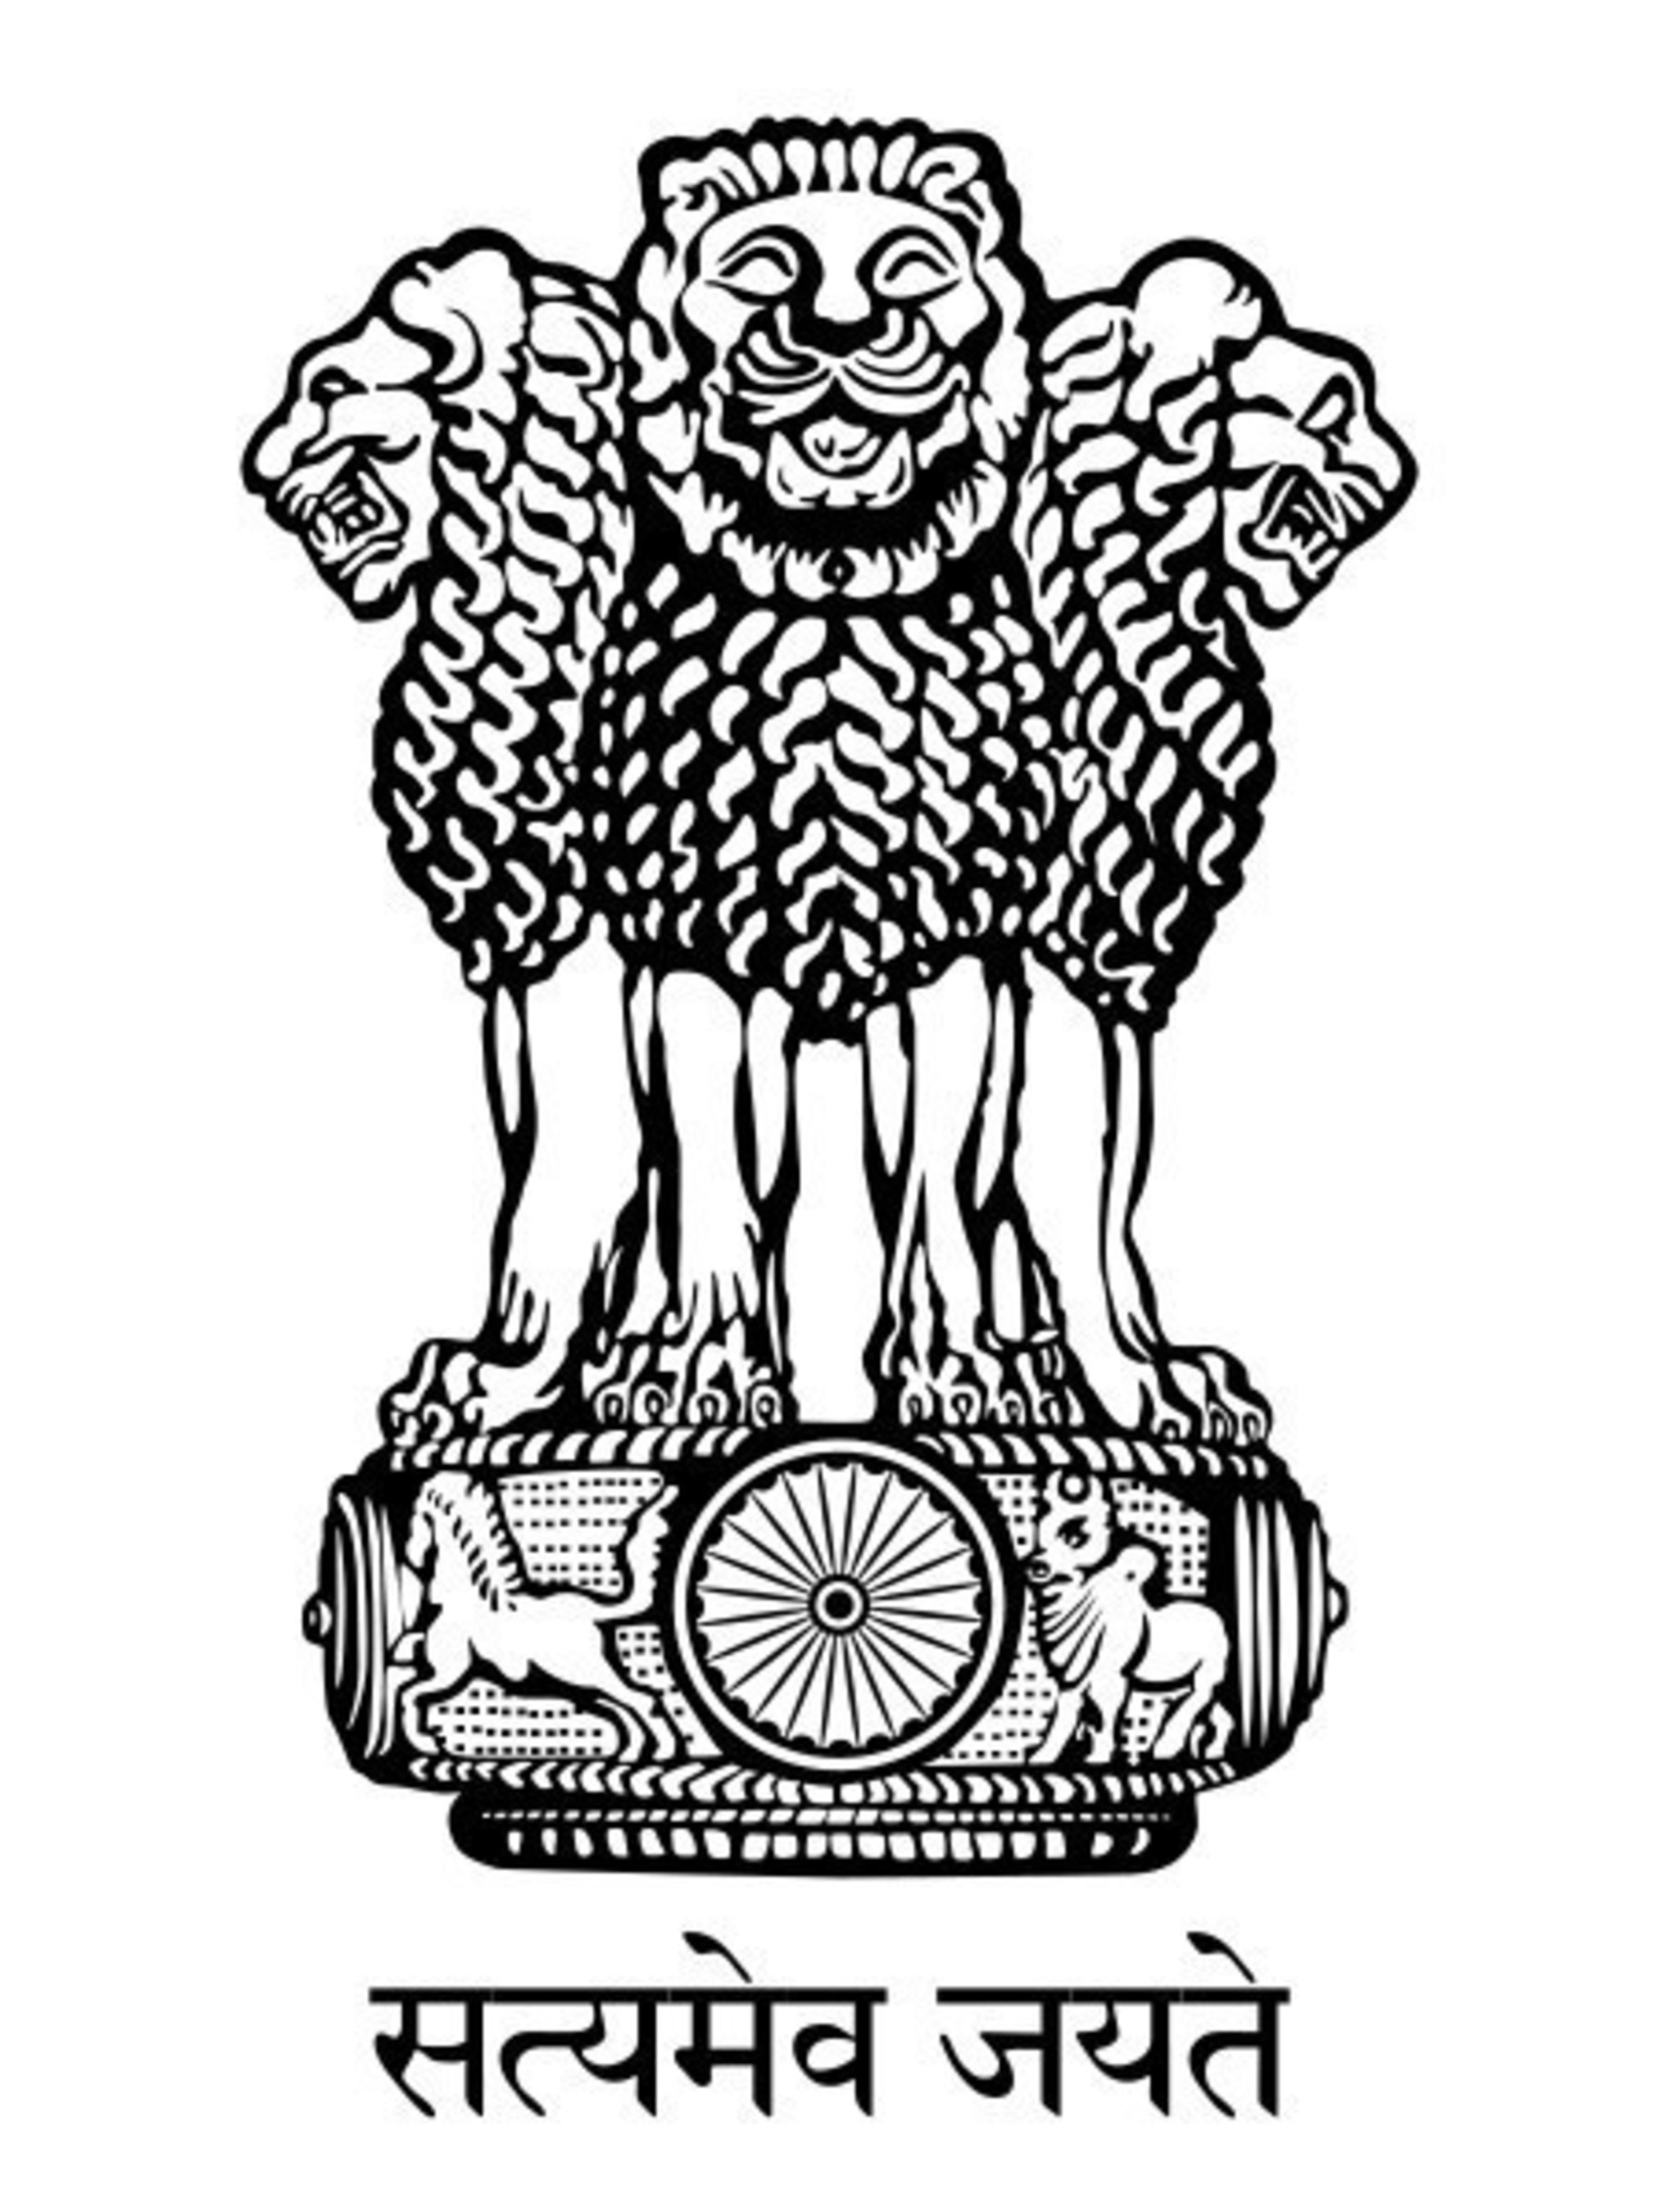 Government of India: http://india.gov.in/